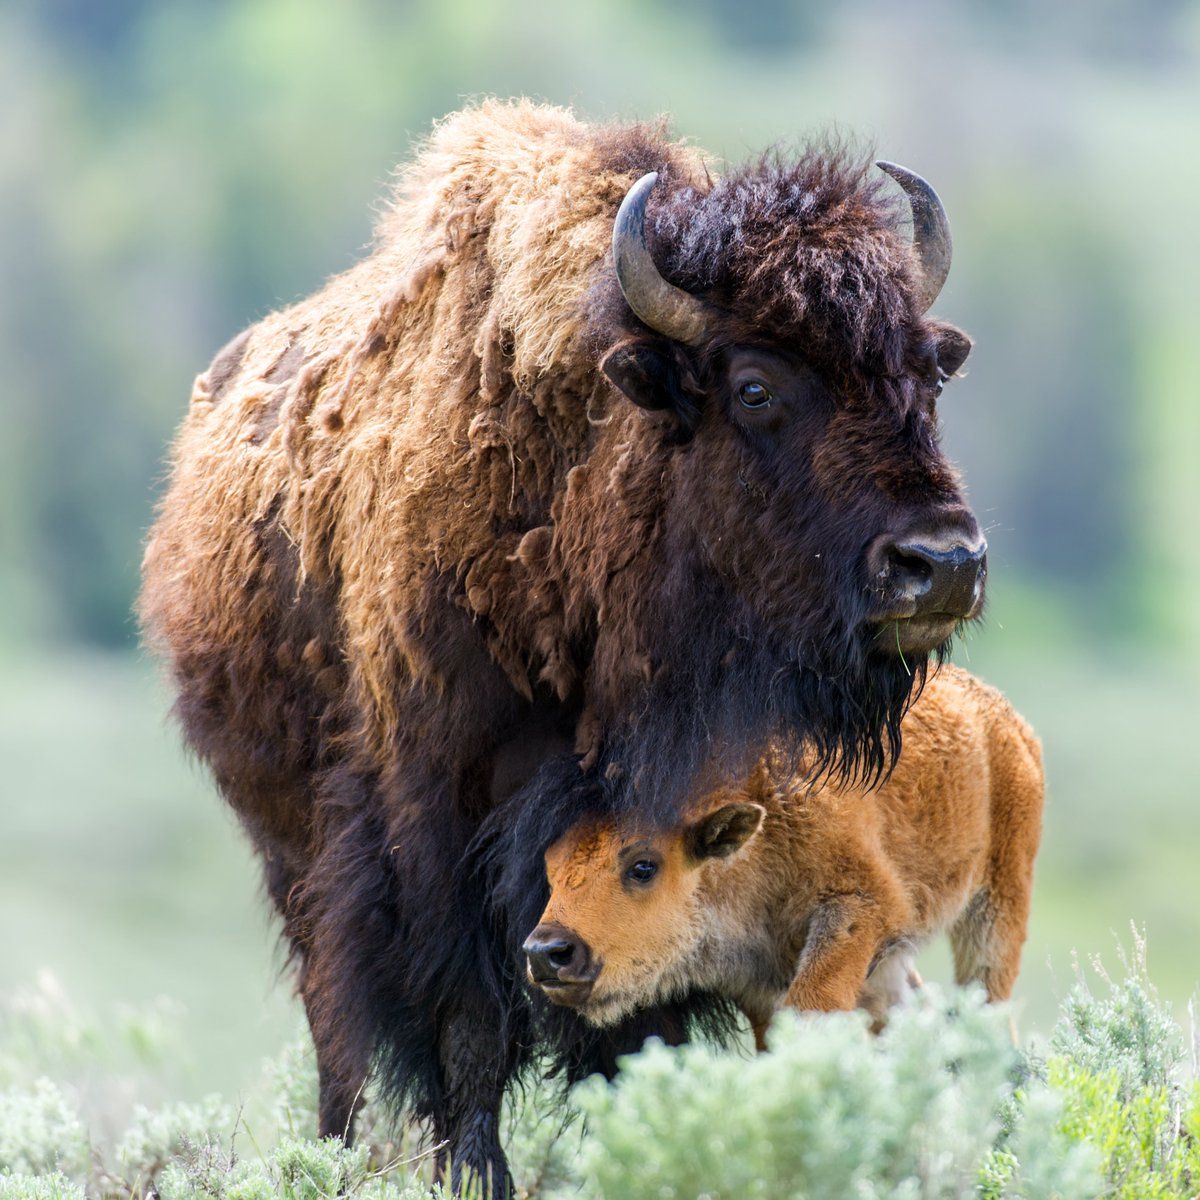 Today is #NationalBisonDay! America's national mammal can reach 2,000 lbs, making it the continent's largest land animal. #Bison calves are sometimes called 'red dogs' as they are orange-red for their first few months of life! 🧡🦬

#wildlife